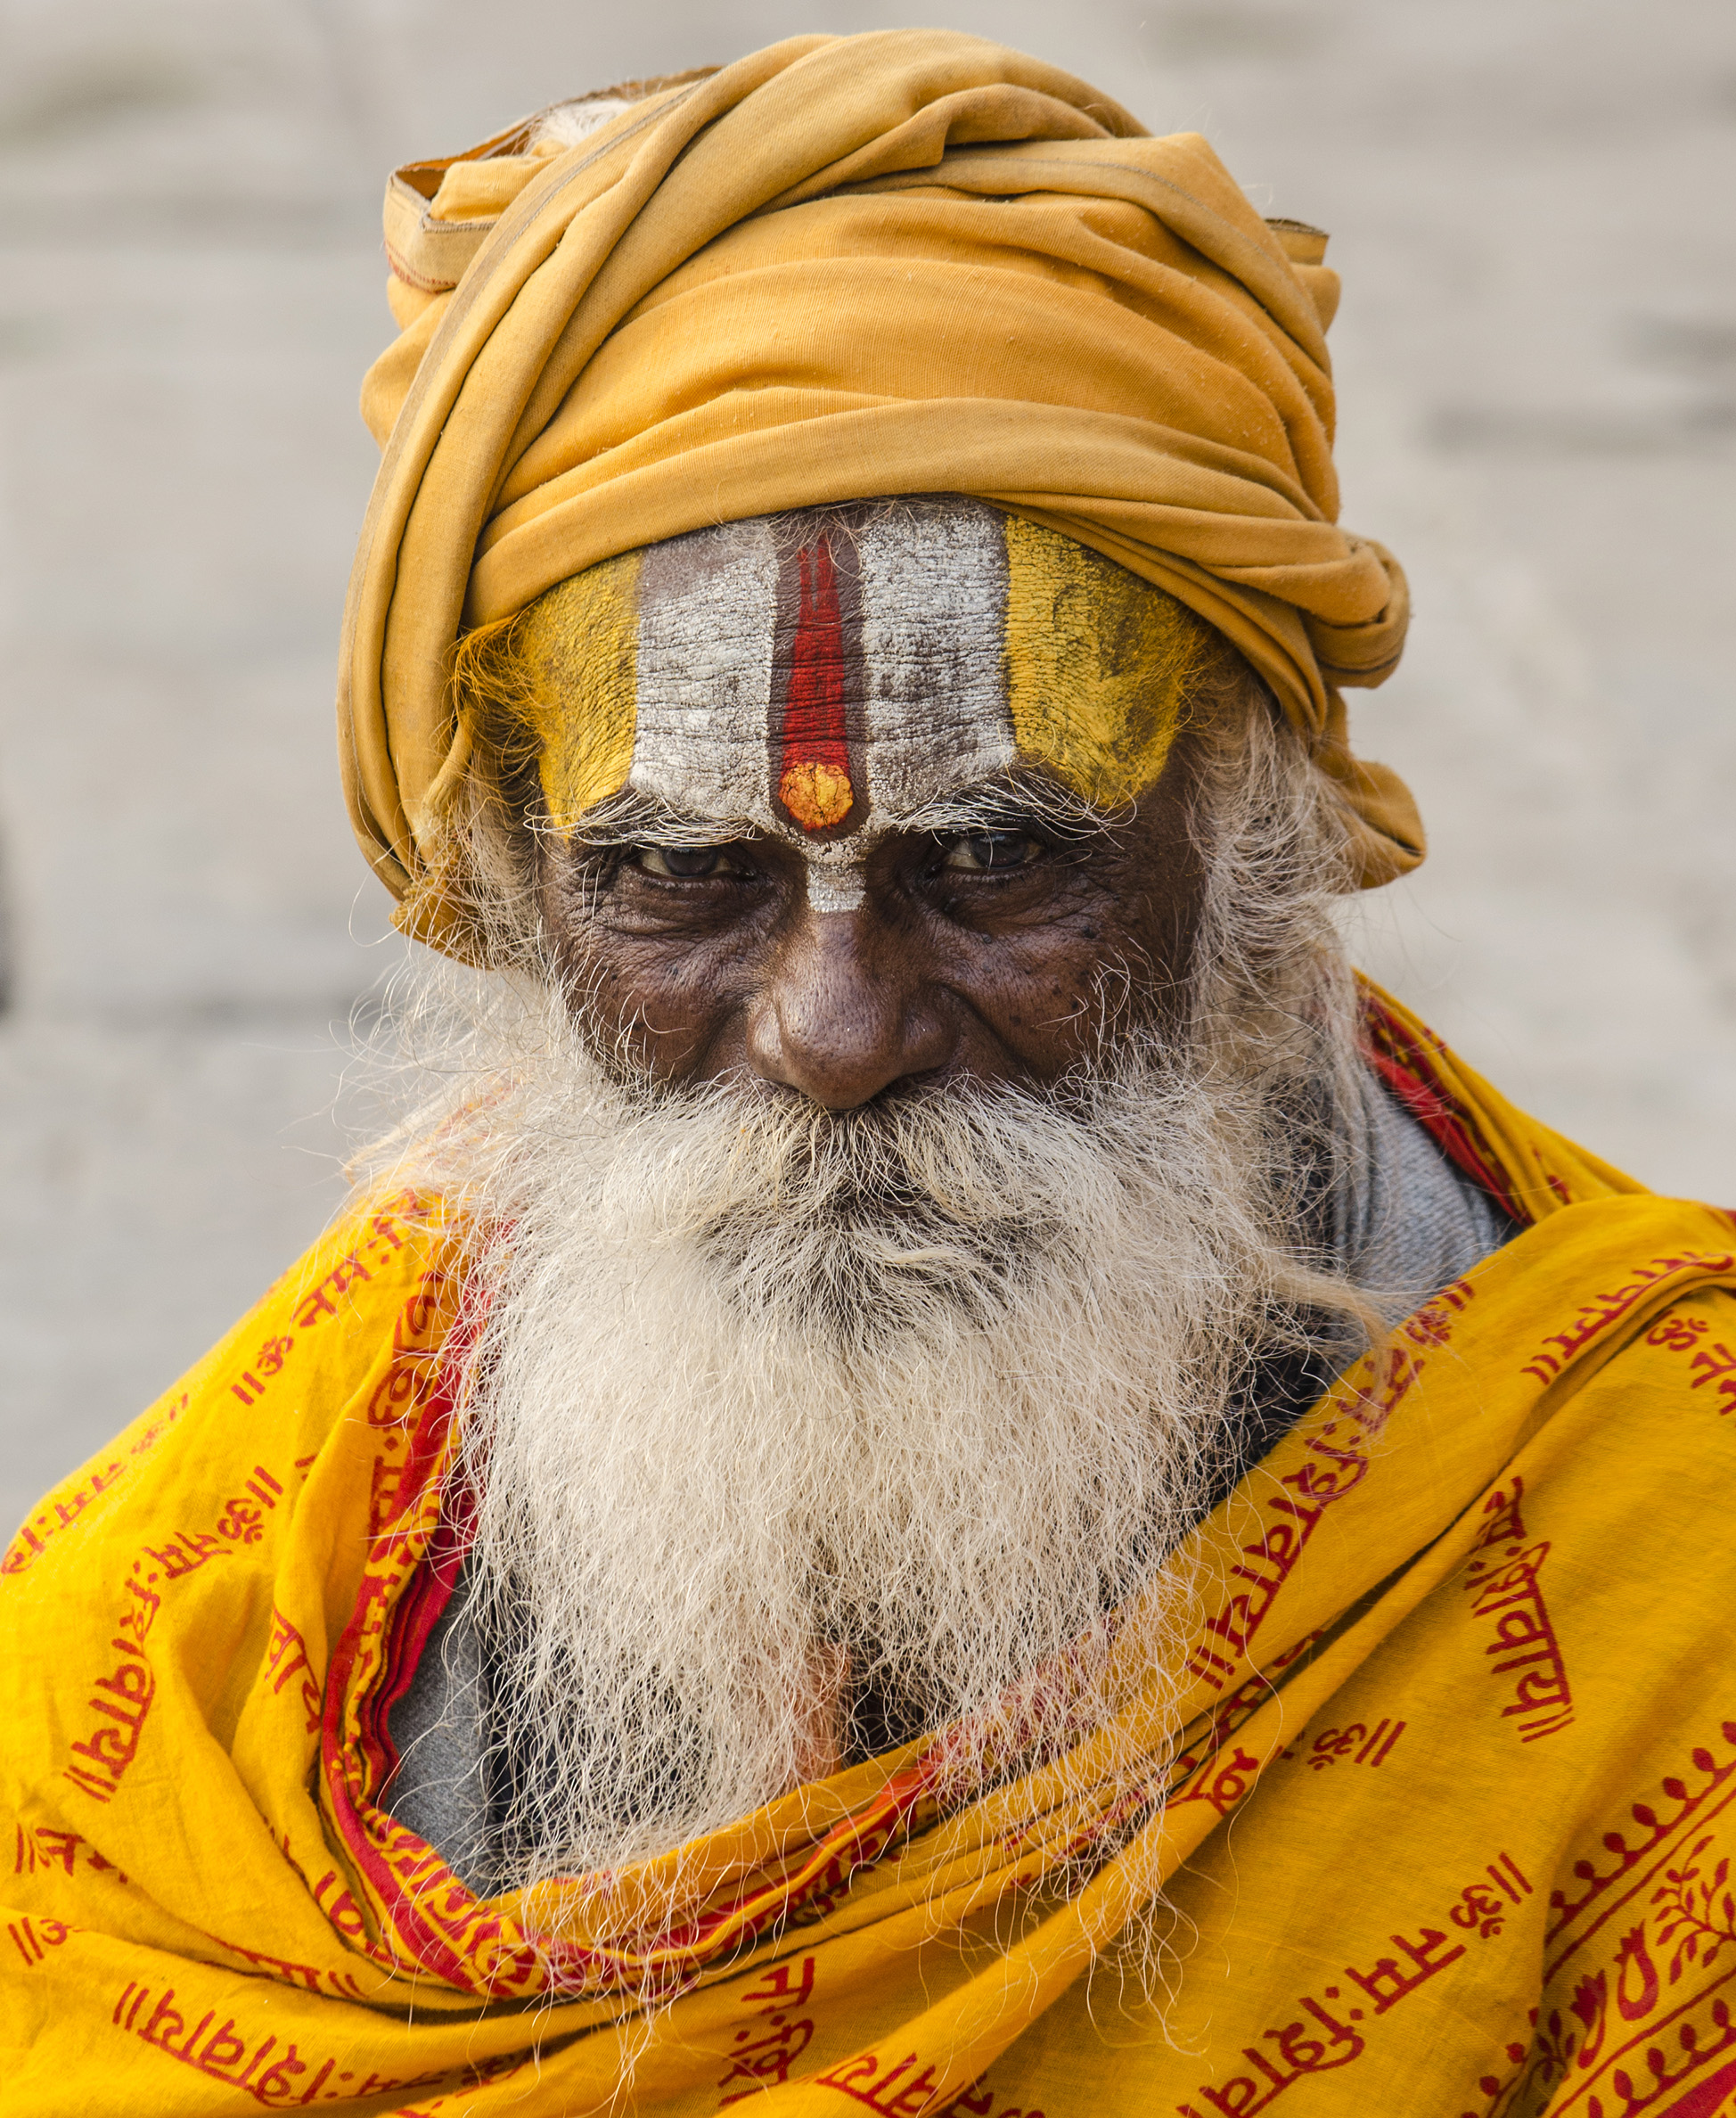 Black and deep eyes that talk about the importance of the life. Old Vaishnavite sadhu.